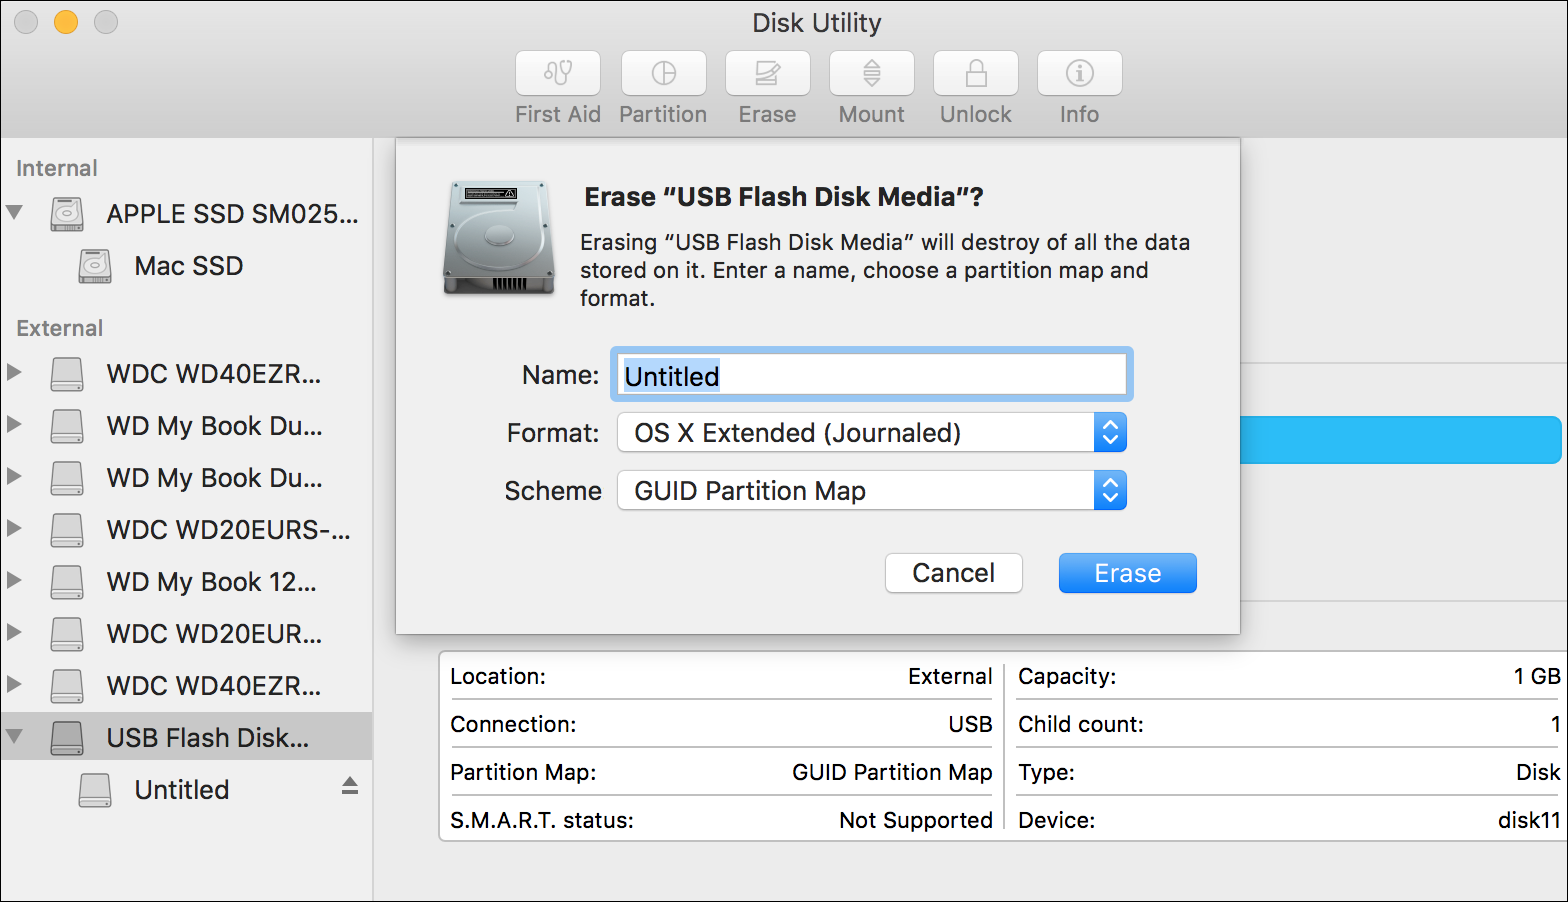 2. Open Disk Utility